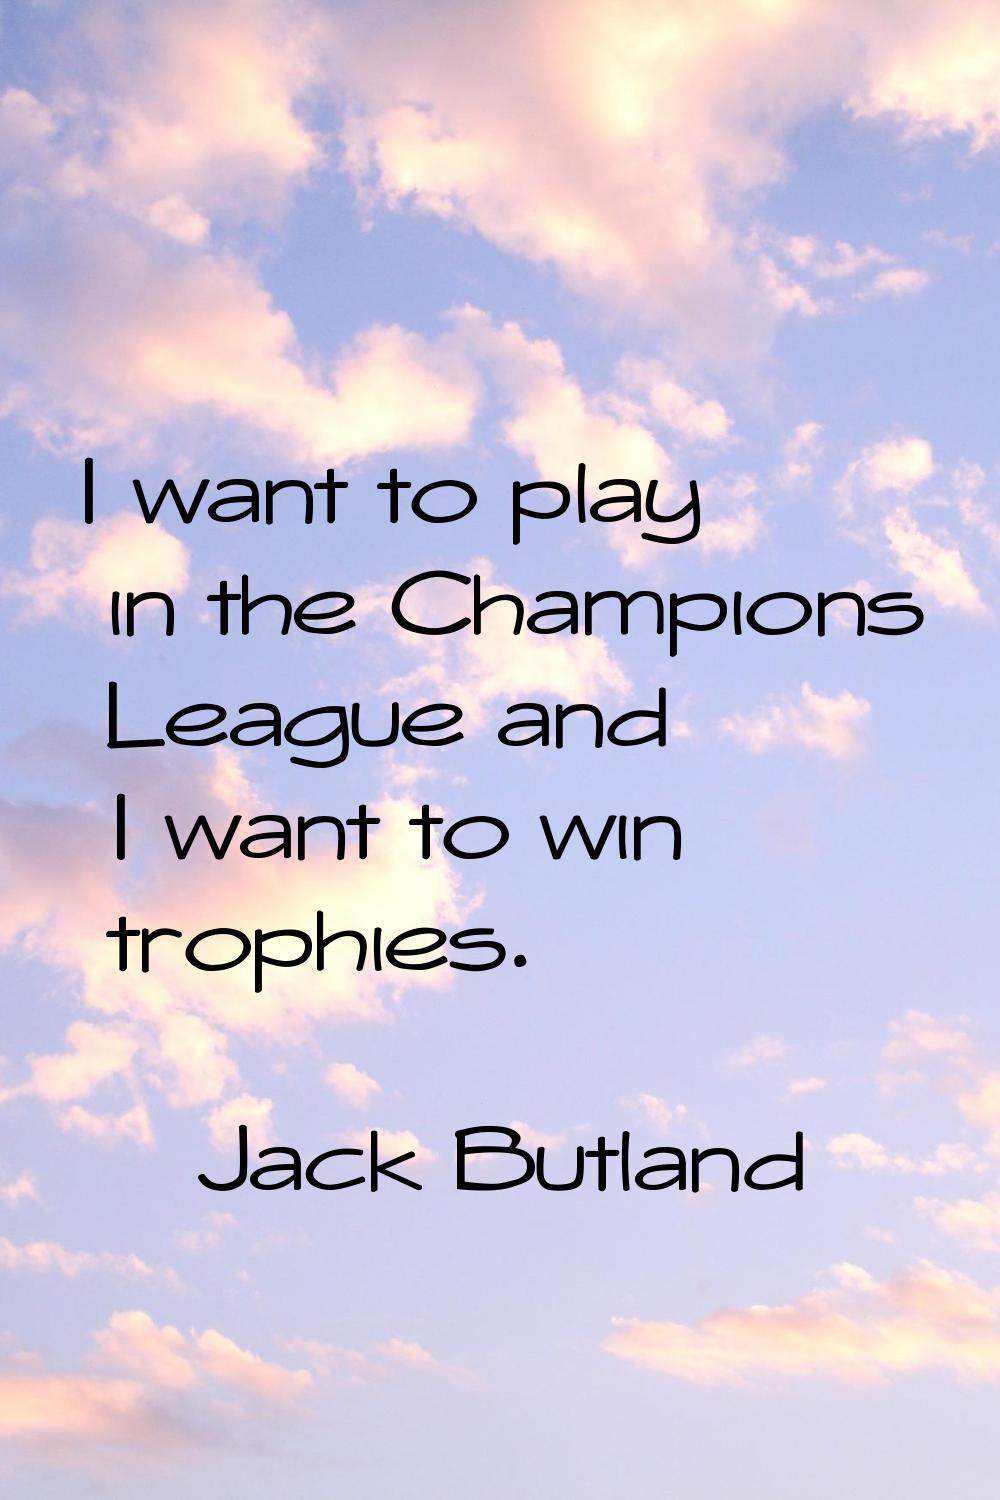 I want to play in the Champions League and I want to win trophies.